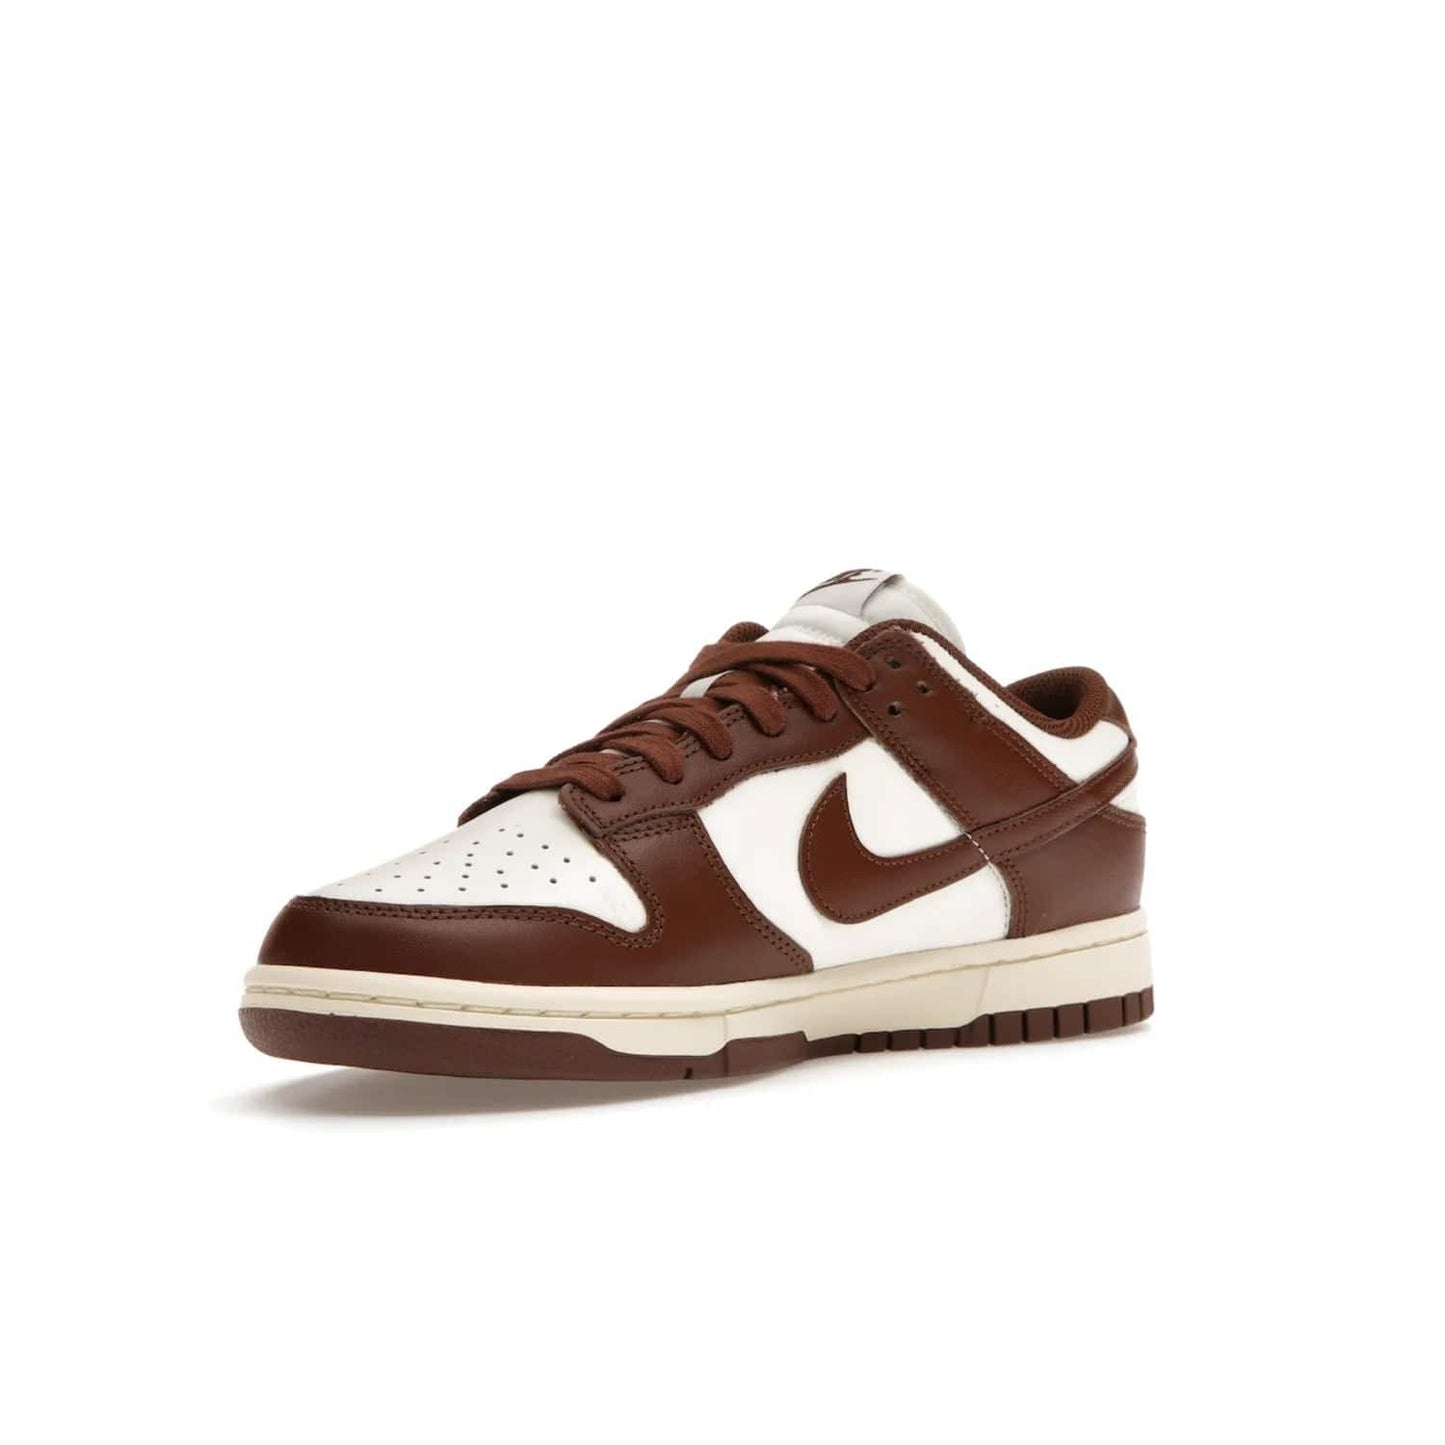 Nike Dunk Low Cacao Wow (Women's) - Image 15 - Only at www.BallersClubKickz.com - Revised
Get the Nike Dunk Low Cacao Wow and make a statement! Plush leather and a cool Cacao Wow finish bring together a unique mix of comfort and fashion that will turn heads. Boosted with a Coconut Milk hue. Shop today.